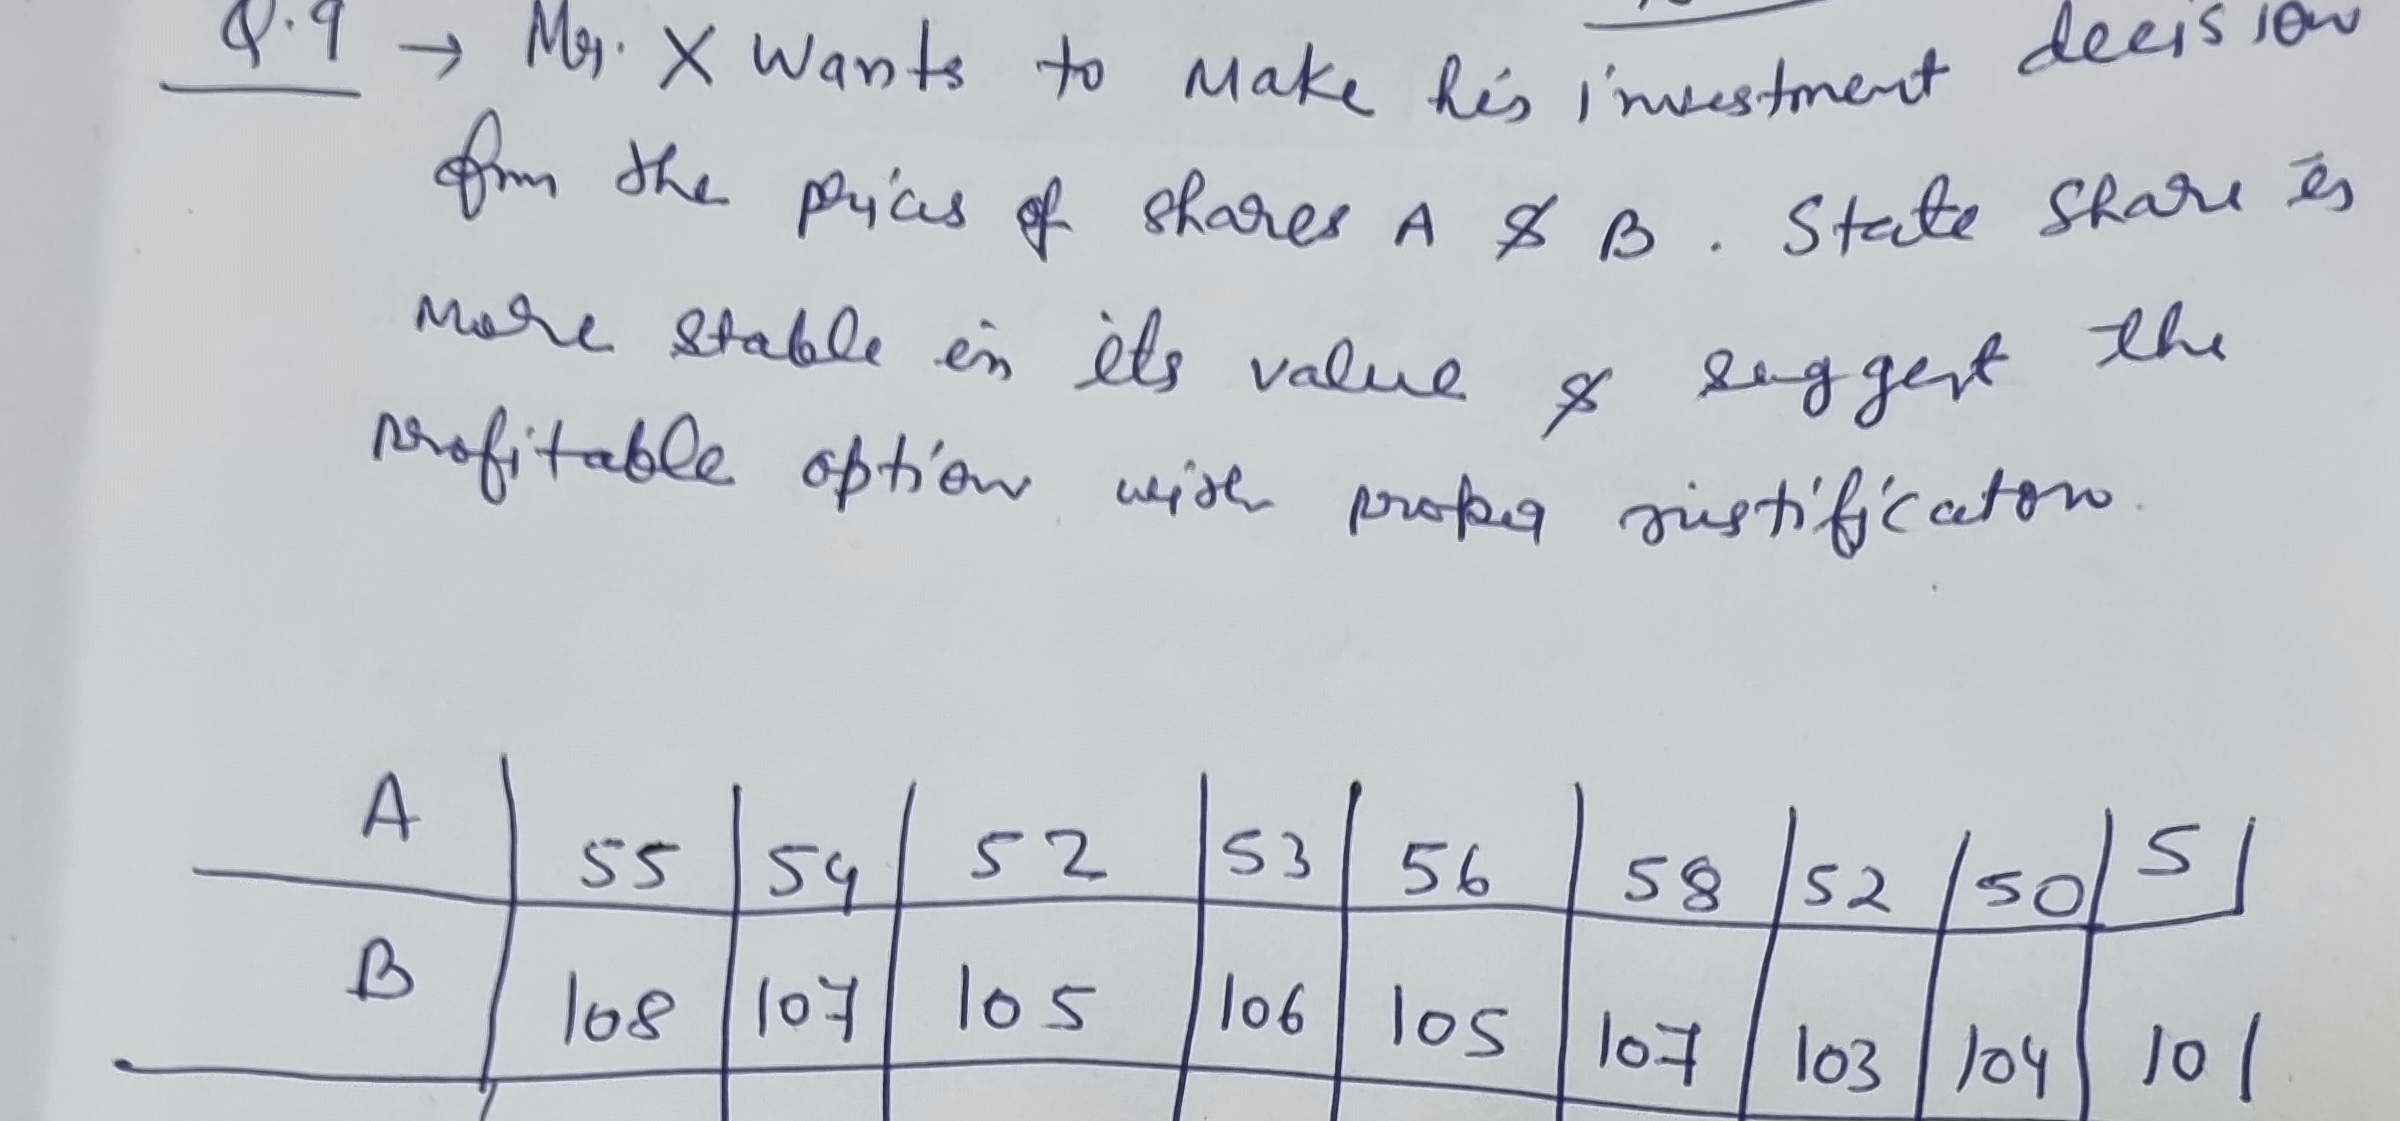 Q.9 Mr. X Wants to make his investment decision. from the prices of shares A & B. State share s more stable